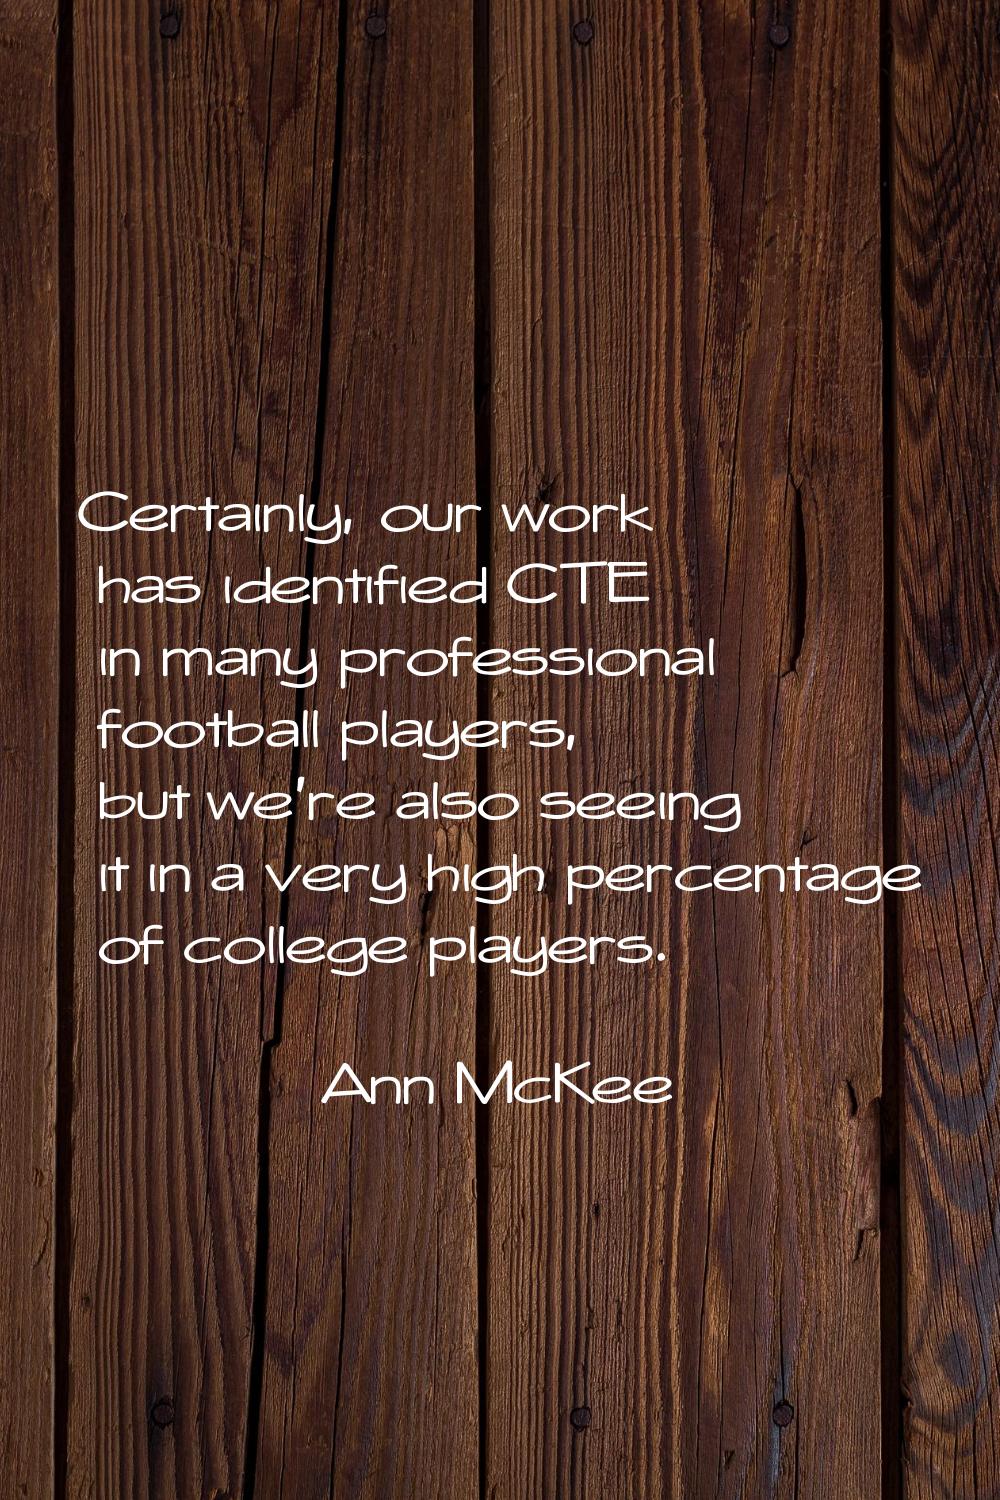 Certainly, our work has identified CTE in many professional football players, but we're also seeing